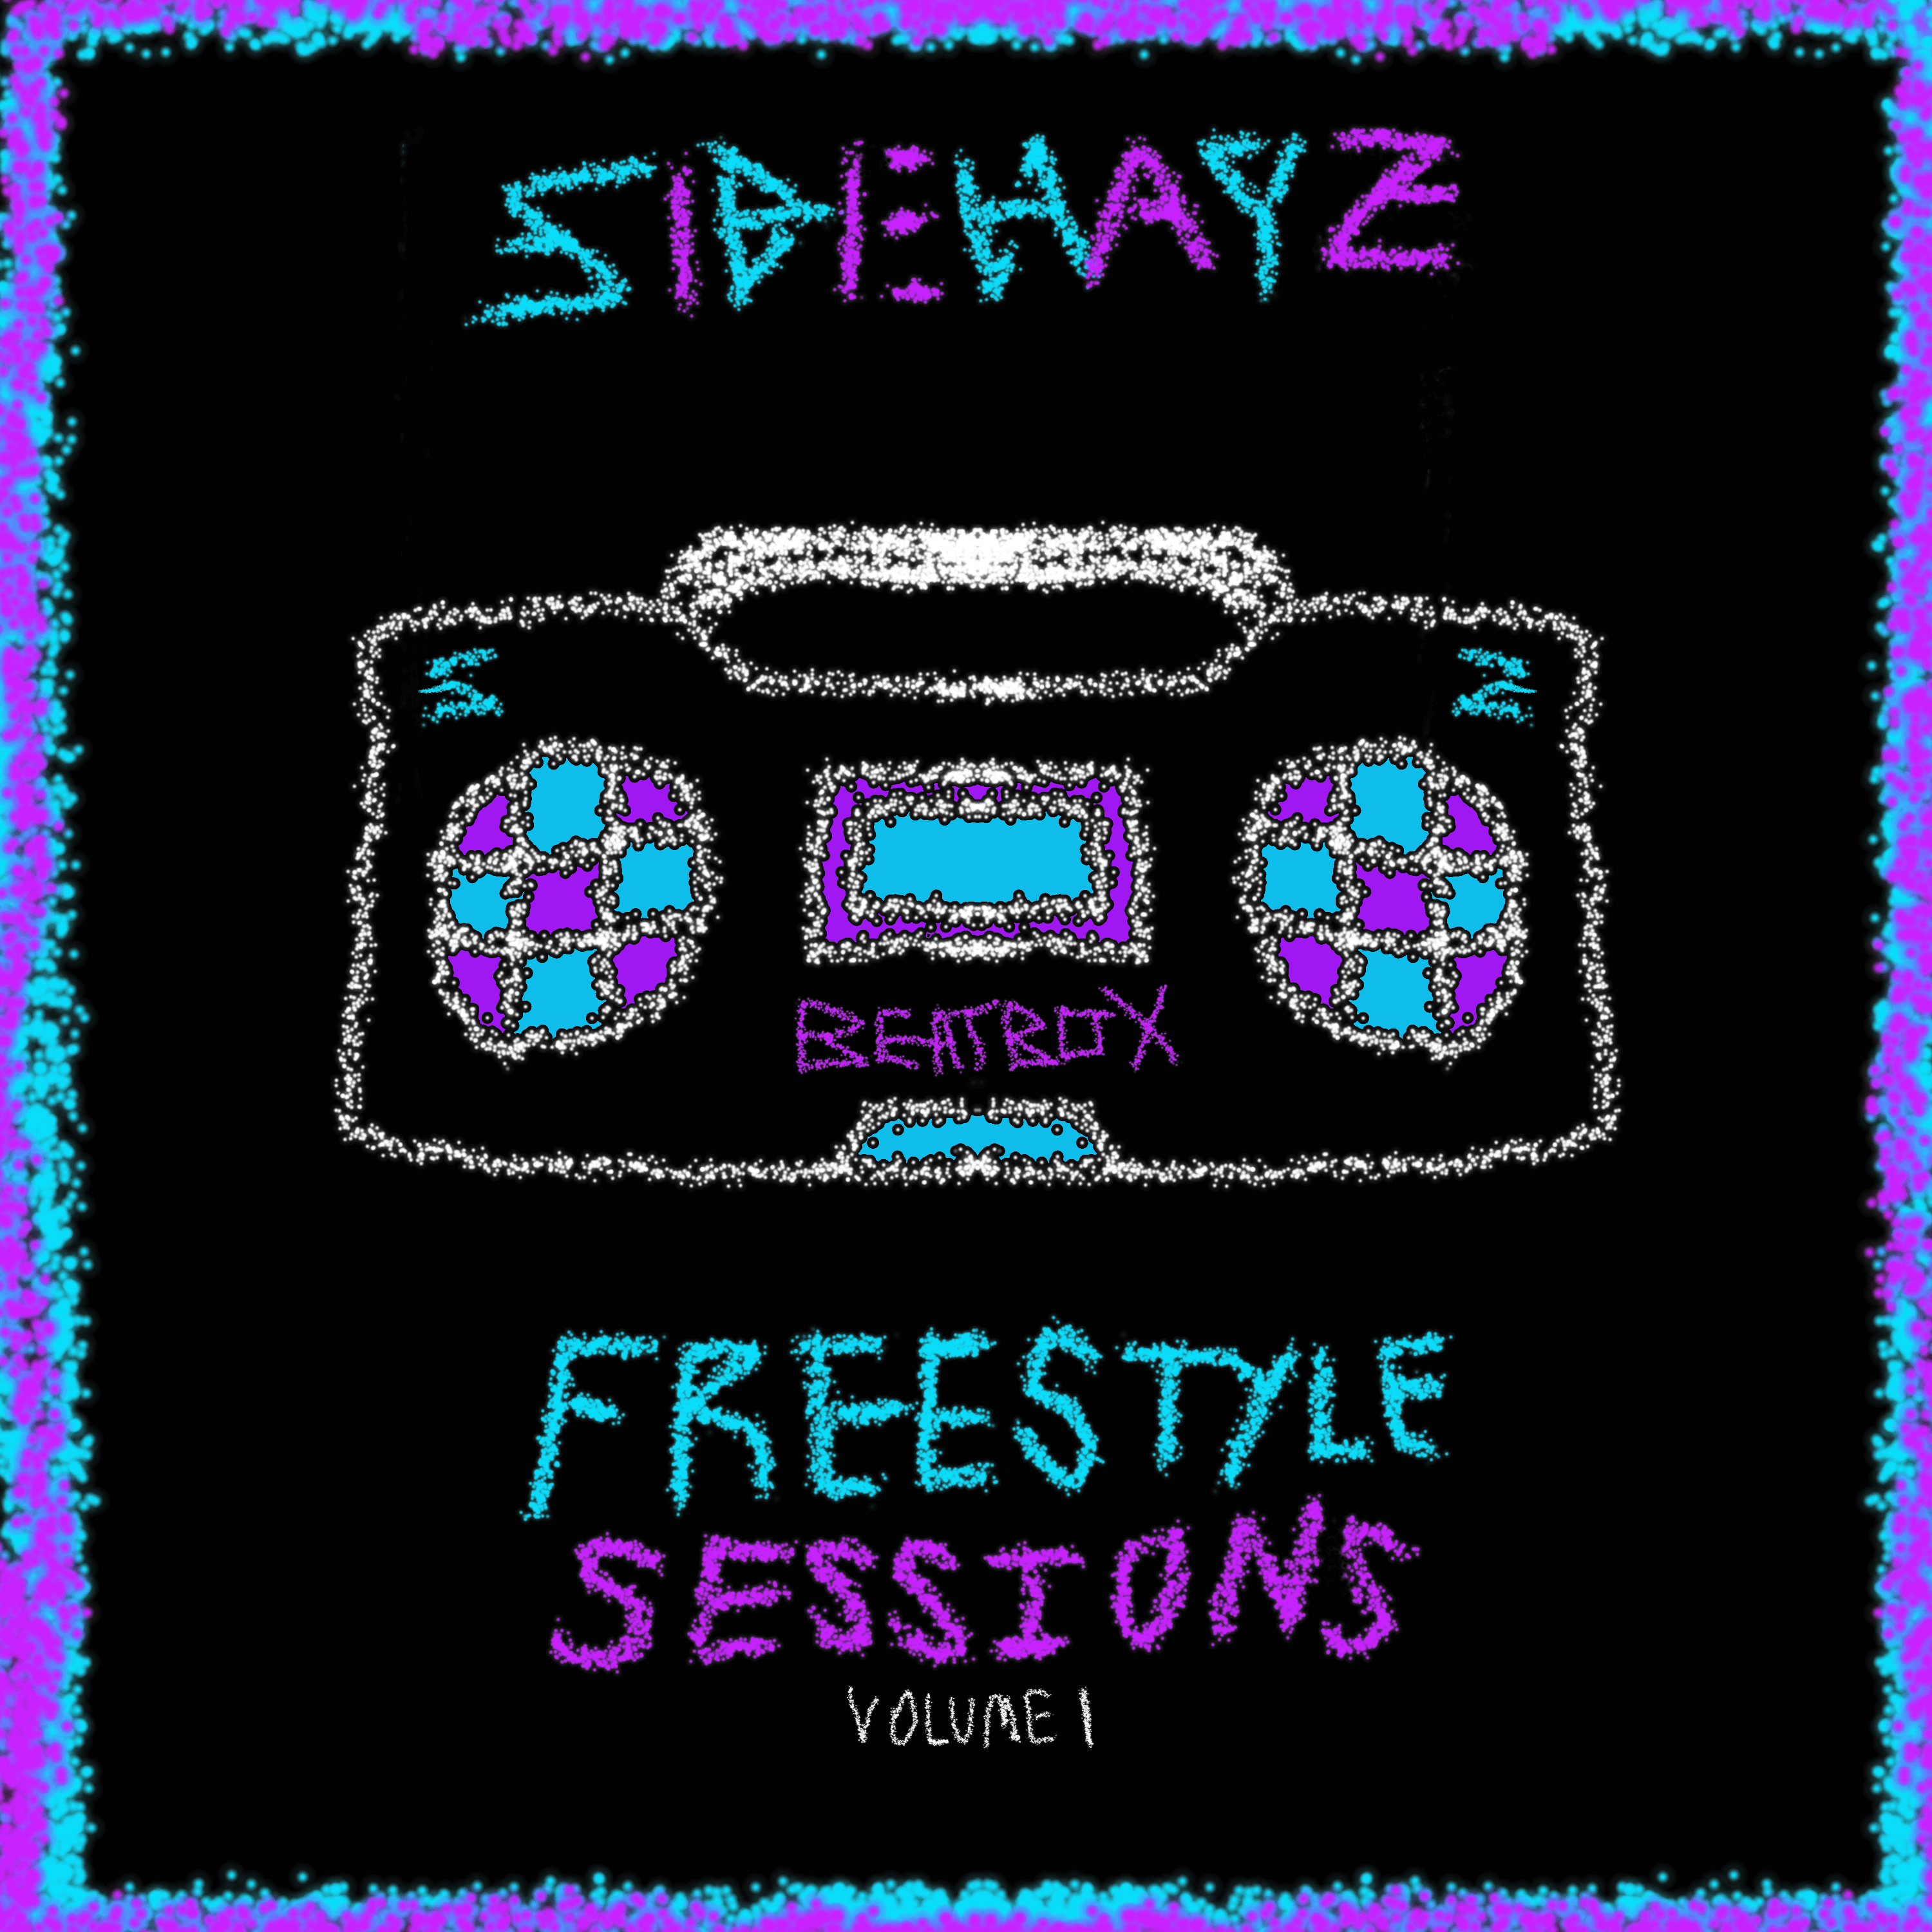 Freestyle Sessions Volume 1 - I